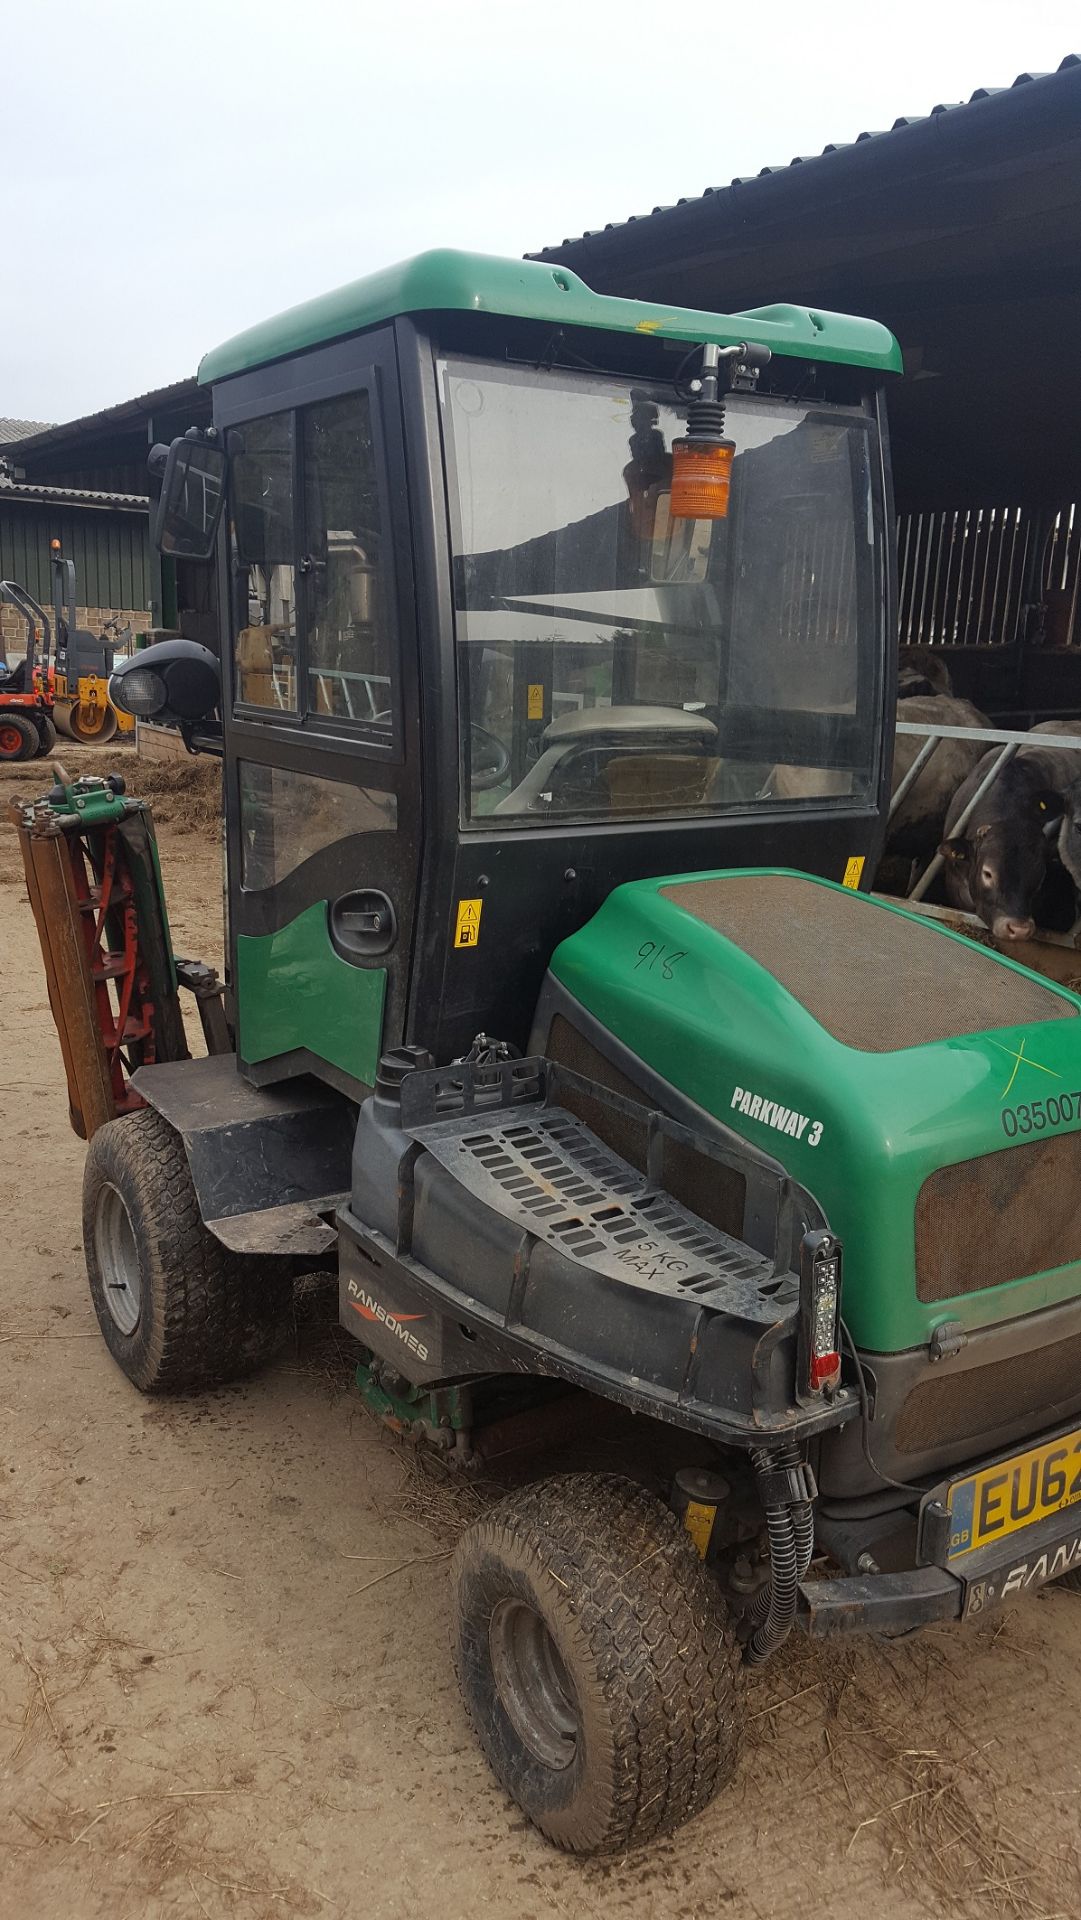 2012 RANSOMES PARKWAY 3 REEL RIDE ON LAWN MOWER WITH CAB *PLUS VAT* - Bild 4 aus 13